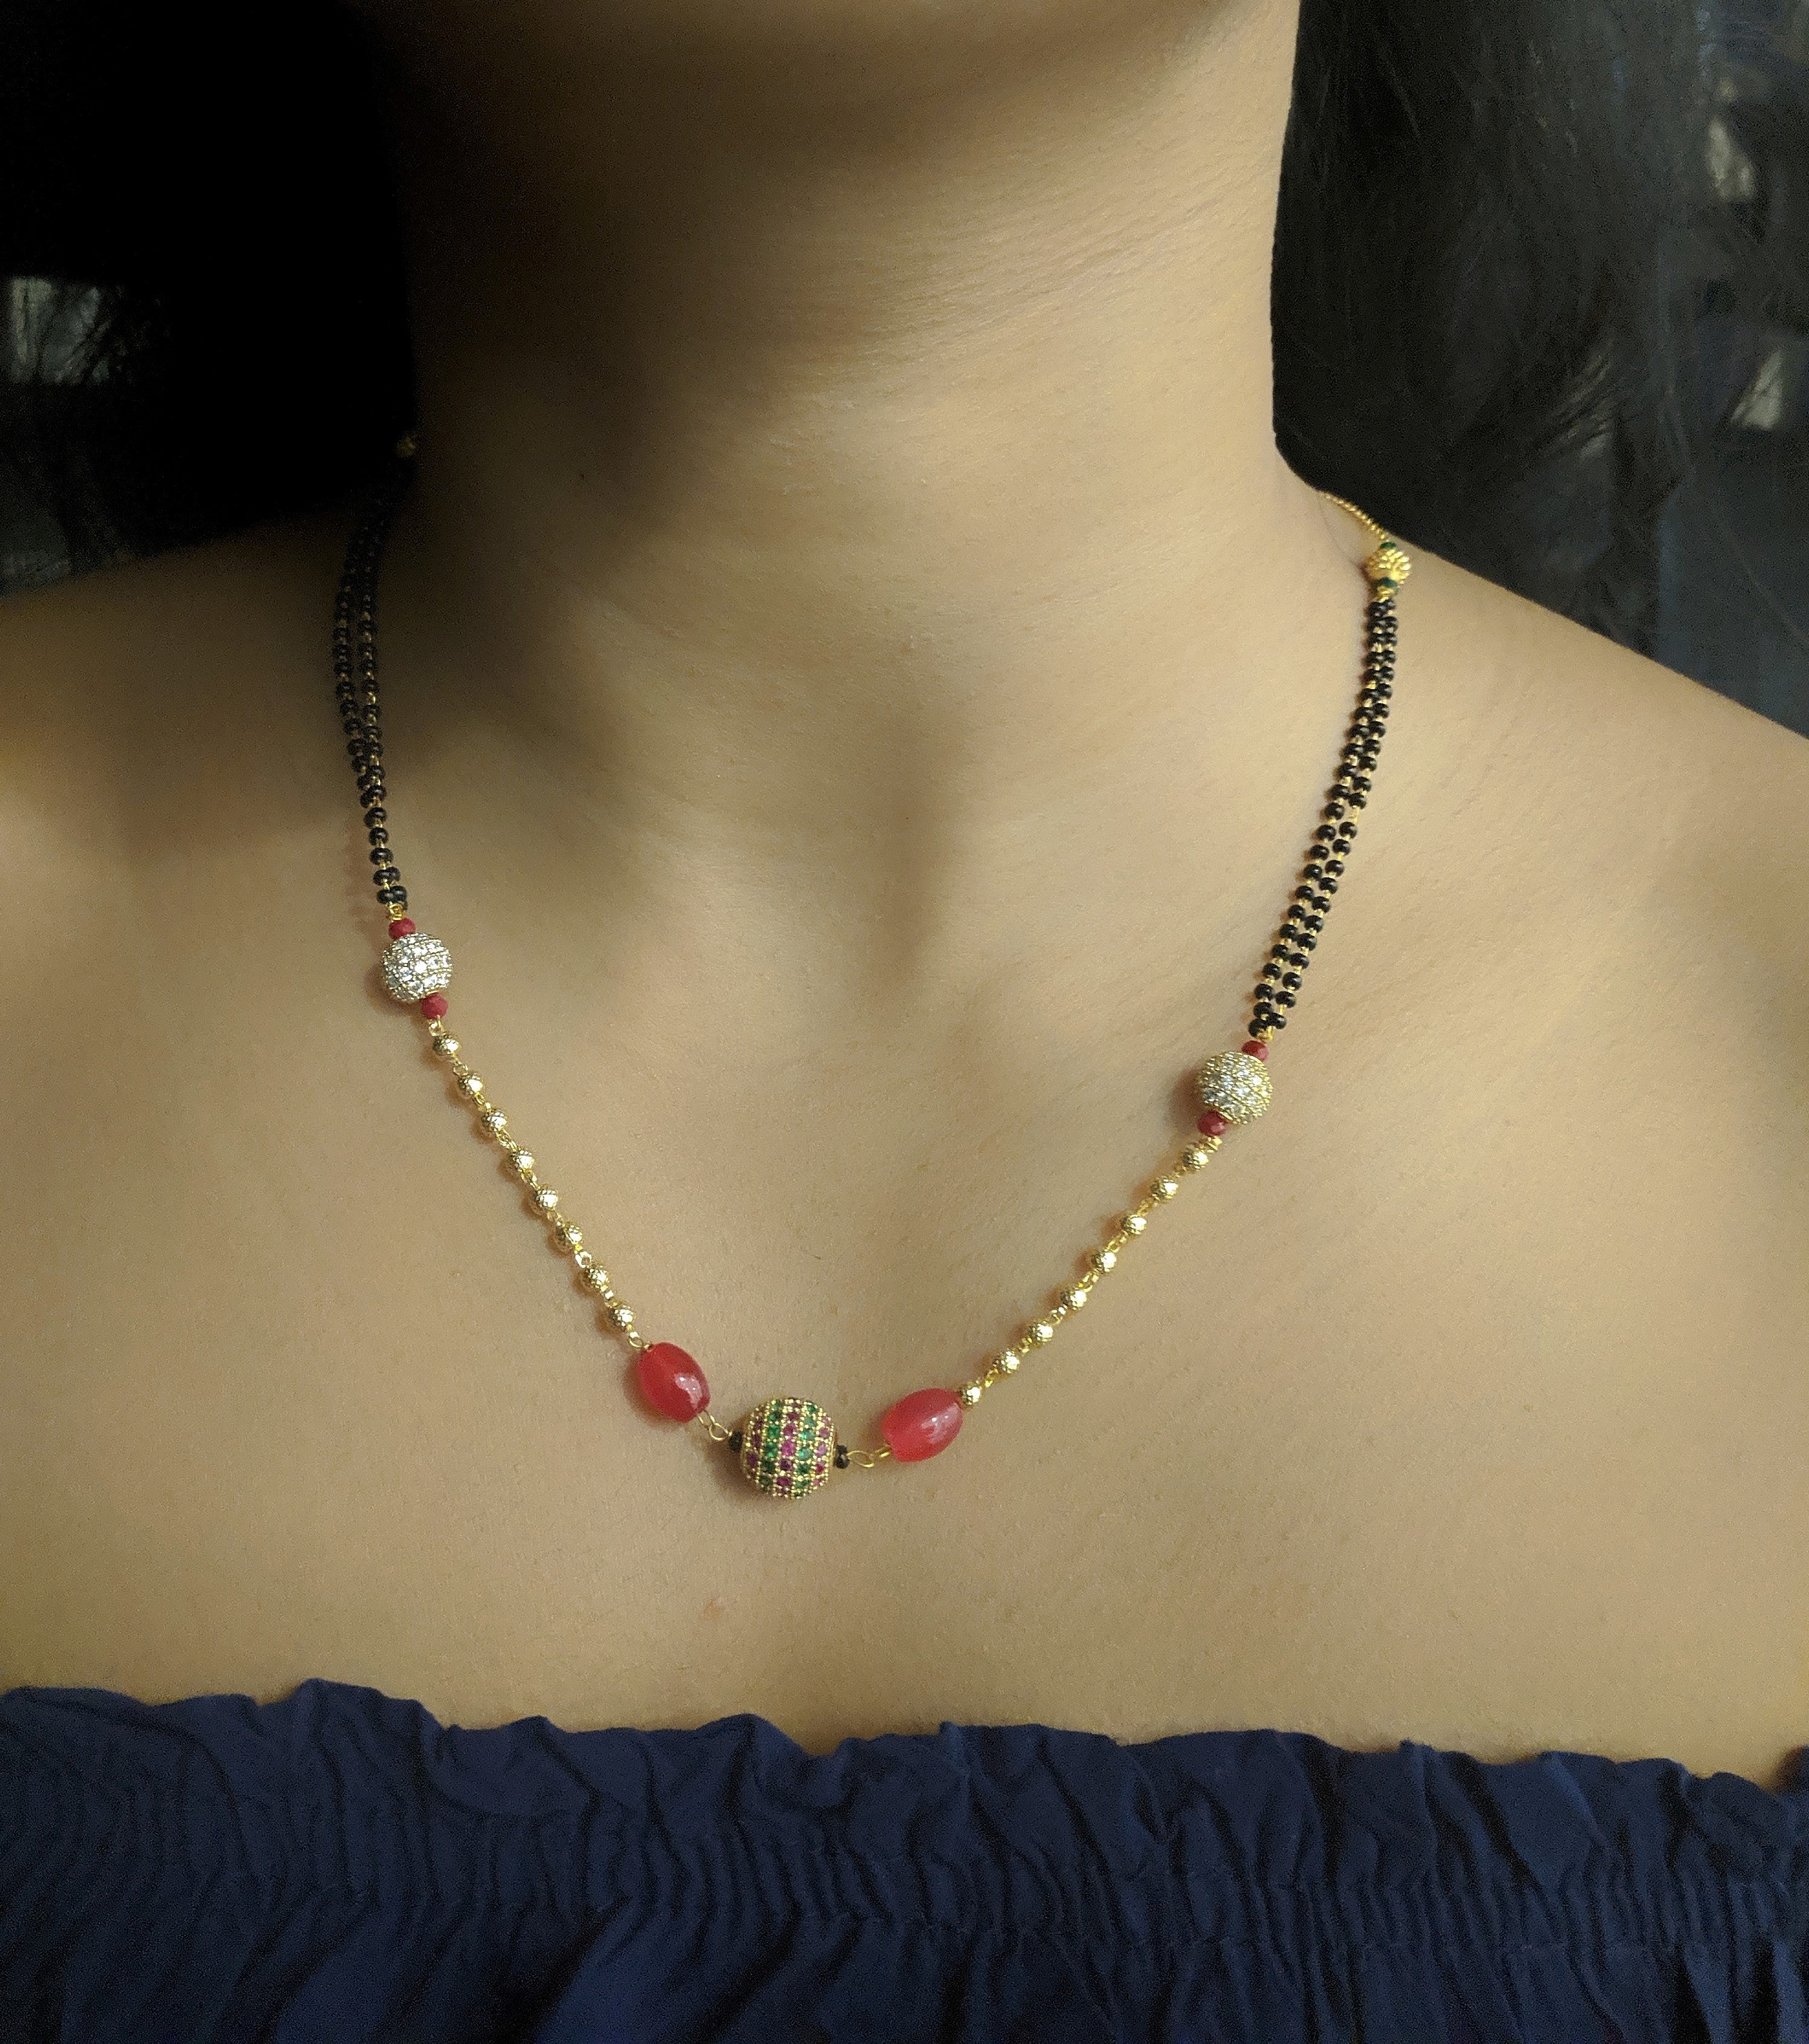 image for Short Mangalsutra Designs Gold Plated Latest Diamond Round Ball Red Beads Mangalsutra